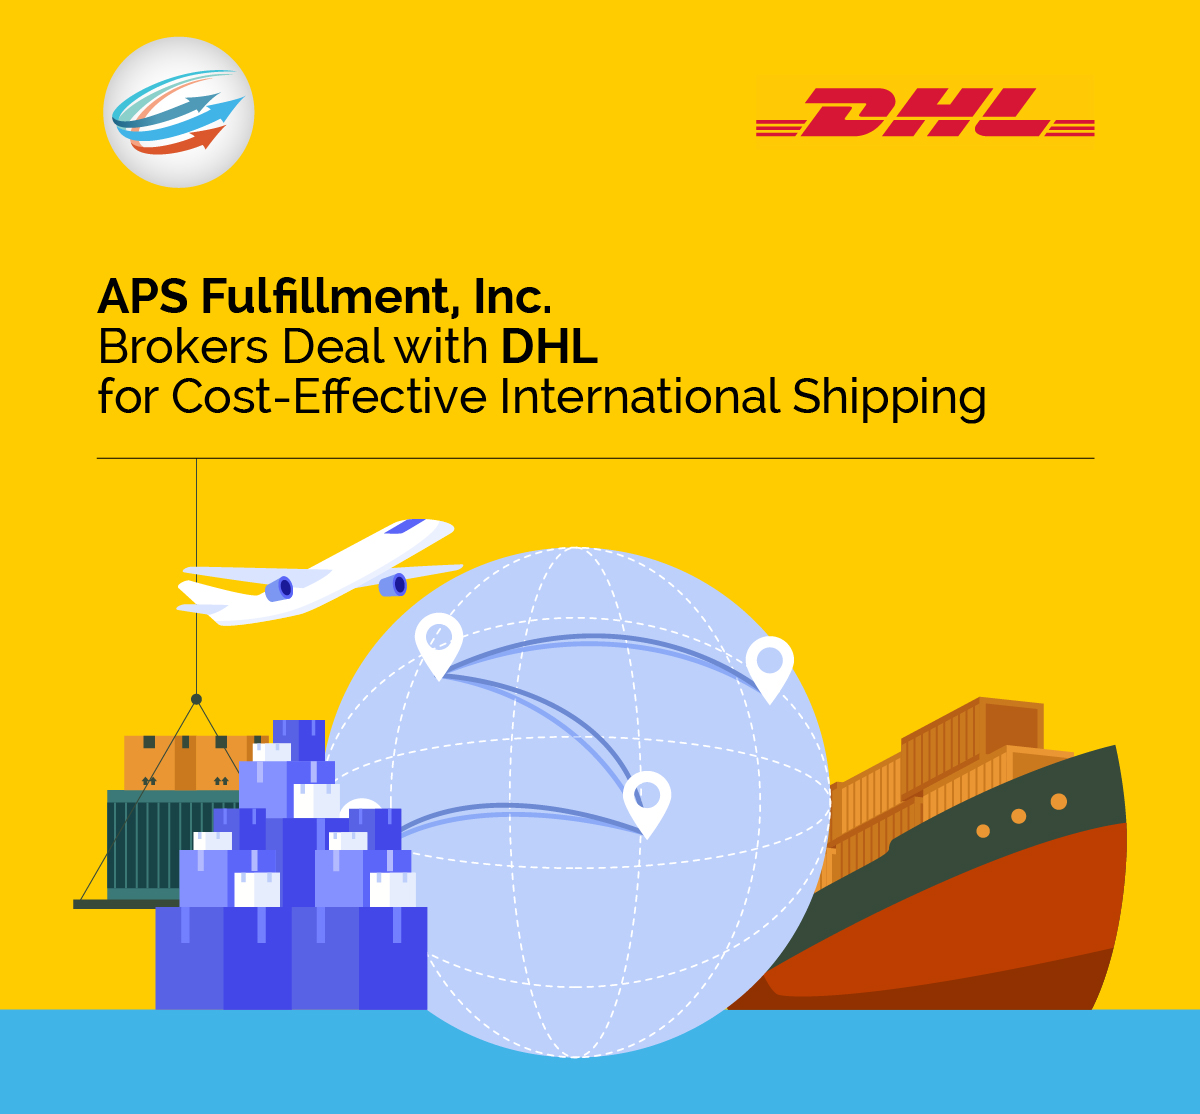 APS Fulfillment, Inc. Brokers Deal with DHL for Cost-Effective International Shipping